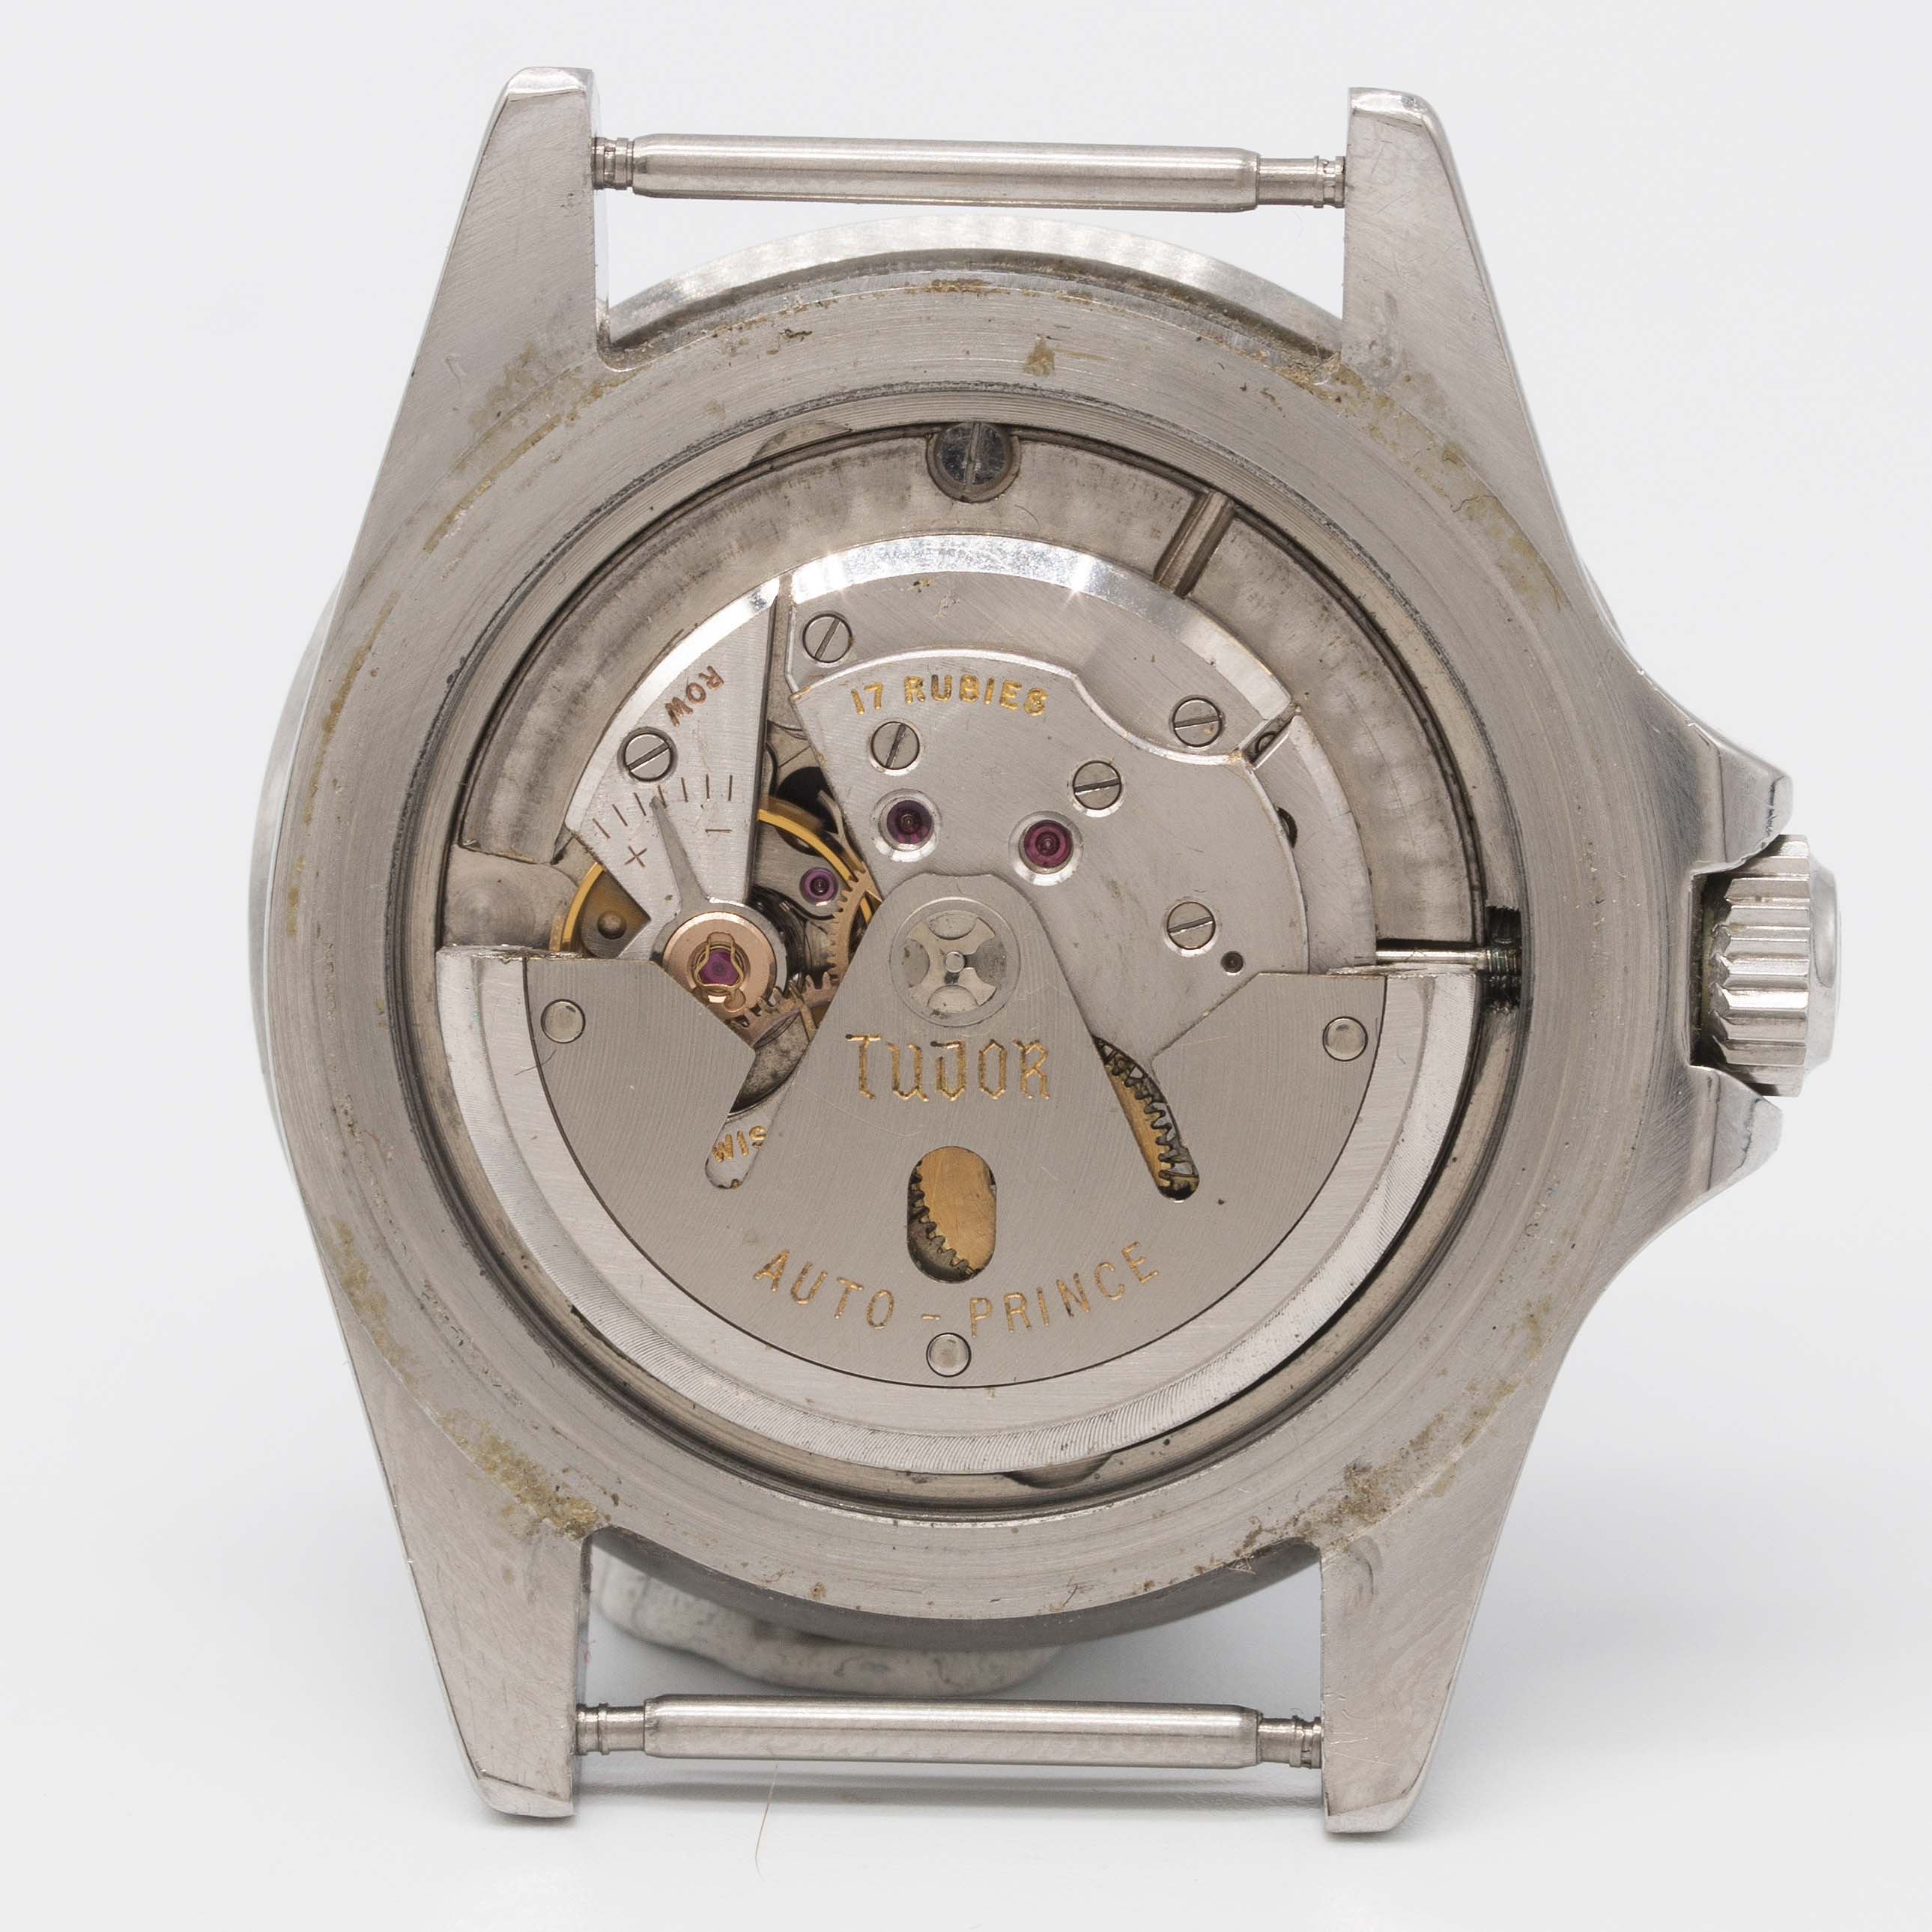 A GENTLEMAN'S STAINLESS STEEL ROLEX TUDOR OYSTER PRINCE SUBMARINER WRIST WATCH CIRCA 1967, REF. - Image 7 of 10